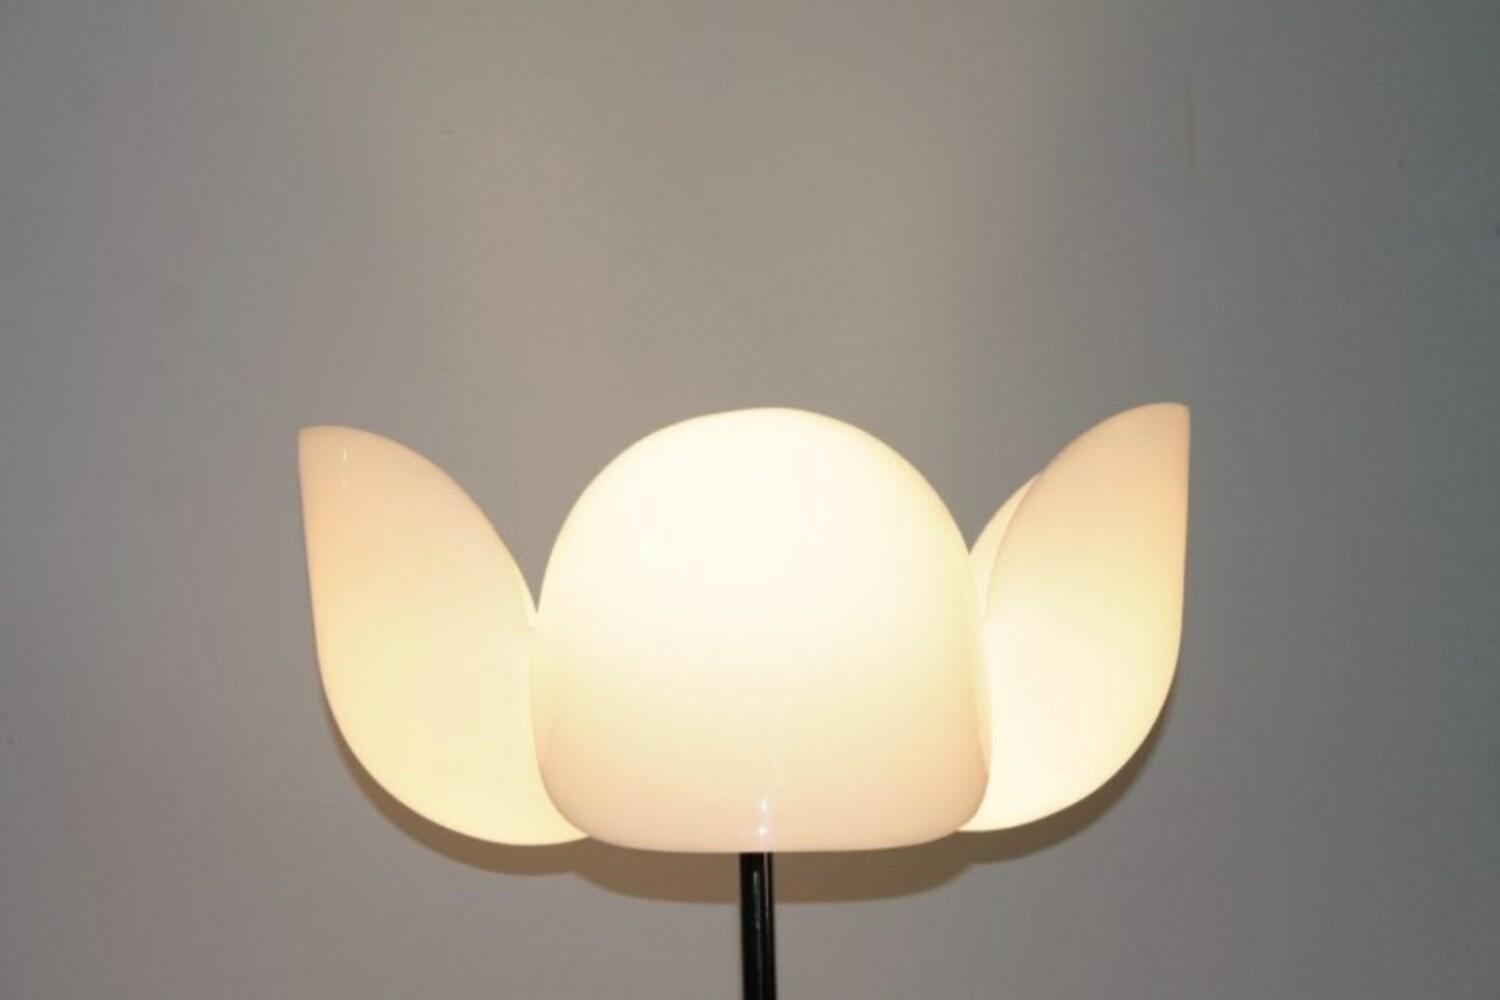 Dafne Floor Lamp by Olaf von Bohr for Valenti Luce, 1970s In Good Condition For Sale In Palermo, Palermo